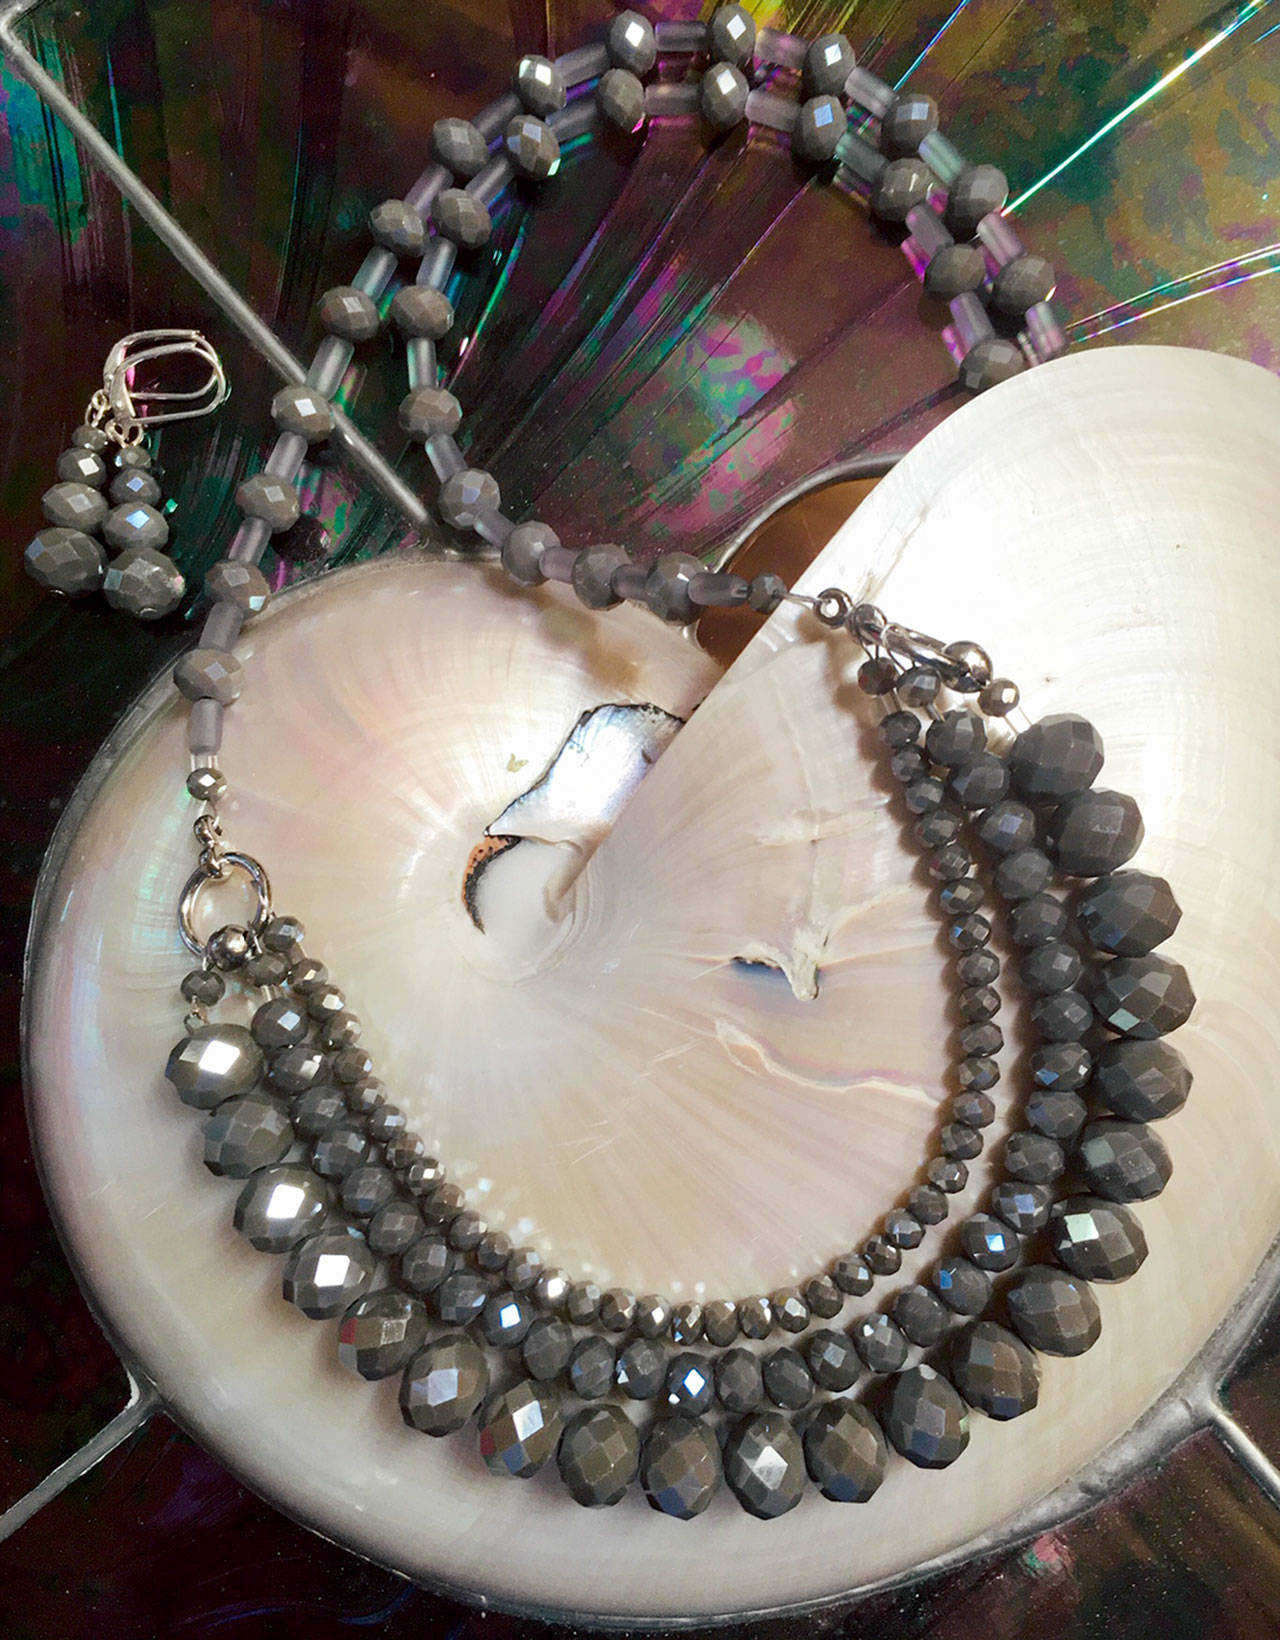 Necklaces by Mara Mauch, Pamela Raine and Linda Henderson will be part of the Port Ludlow Art League’s show of Artists of the Month, which include seven jewelers. (Pamela Raine)